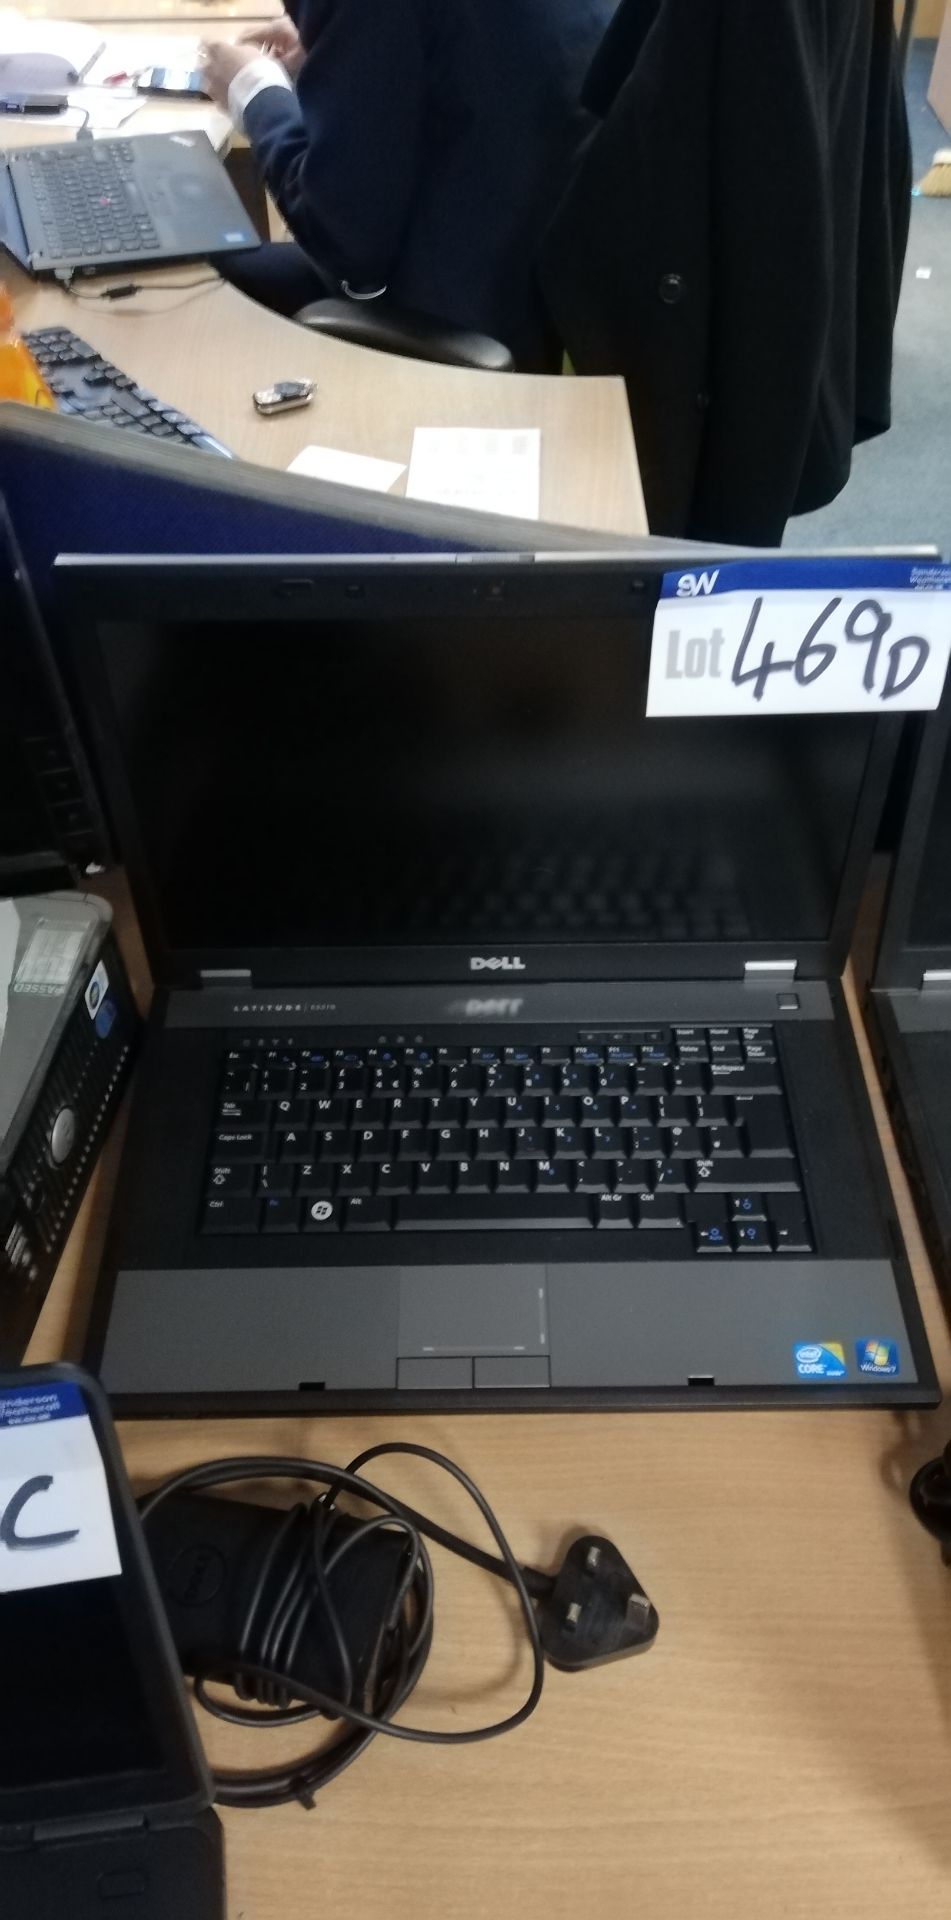 Dell Latitude E5510 Intel Core i3 Laptop (hard disk removed), serial no. G5DZ4N1 (lot located at